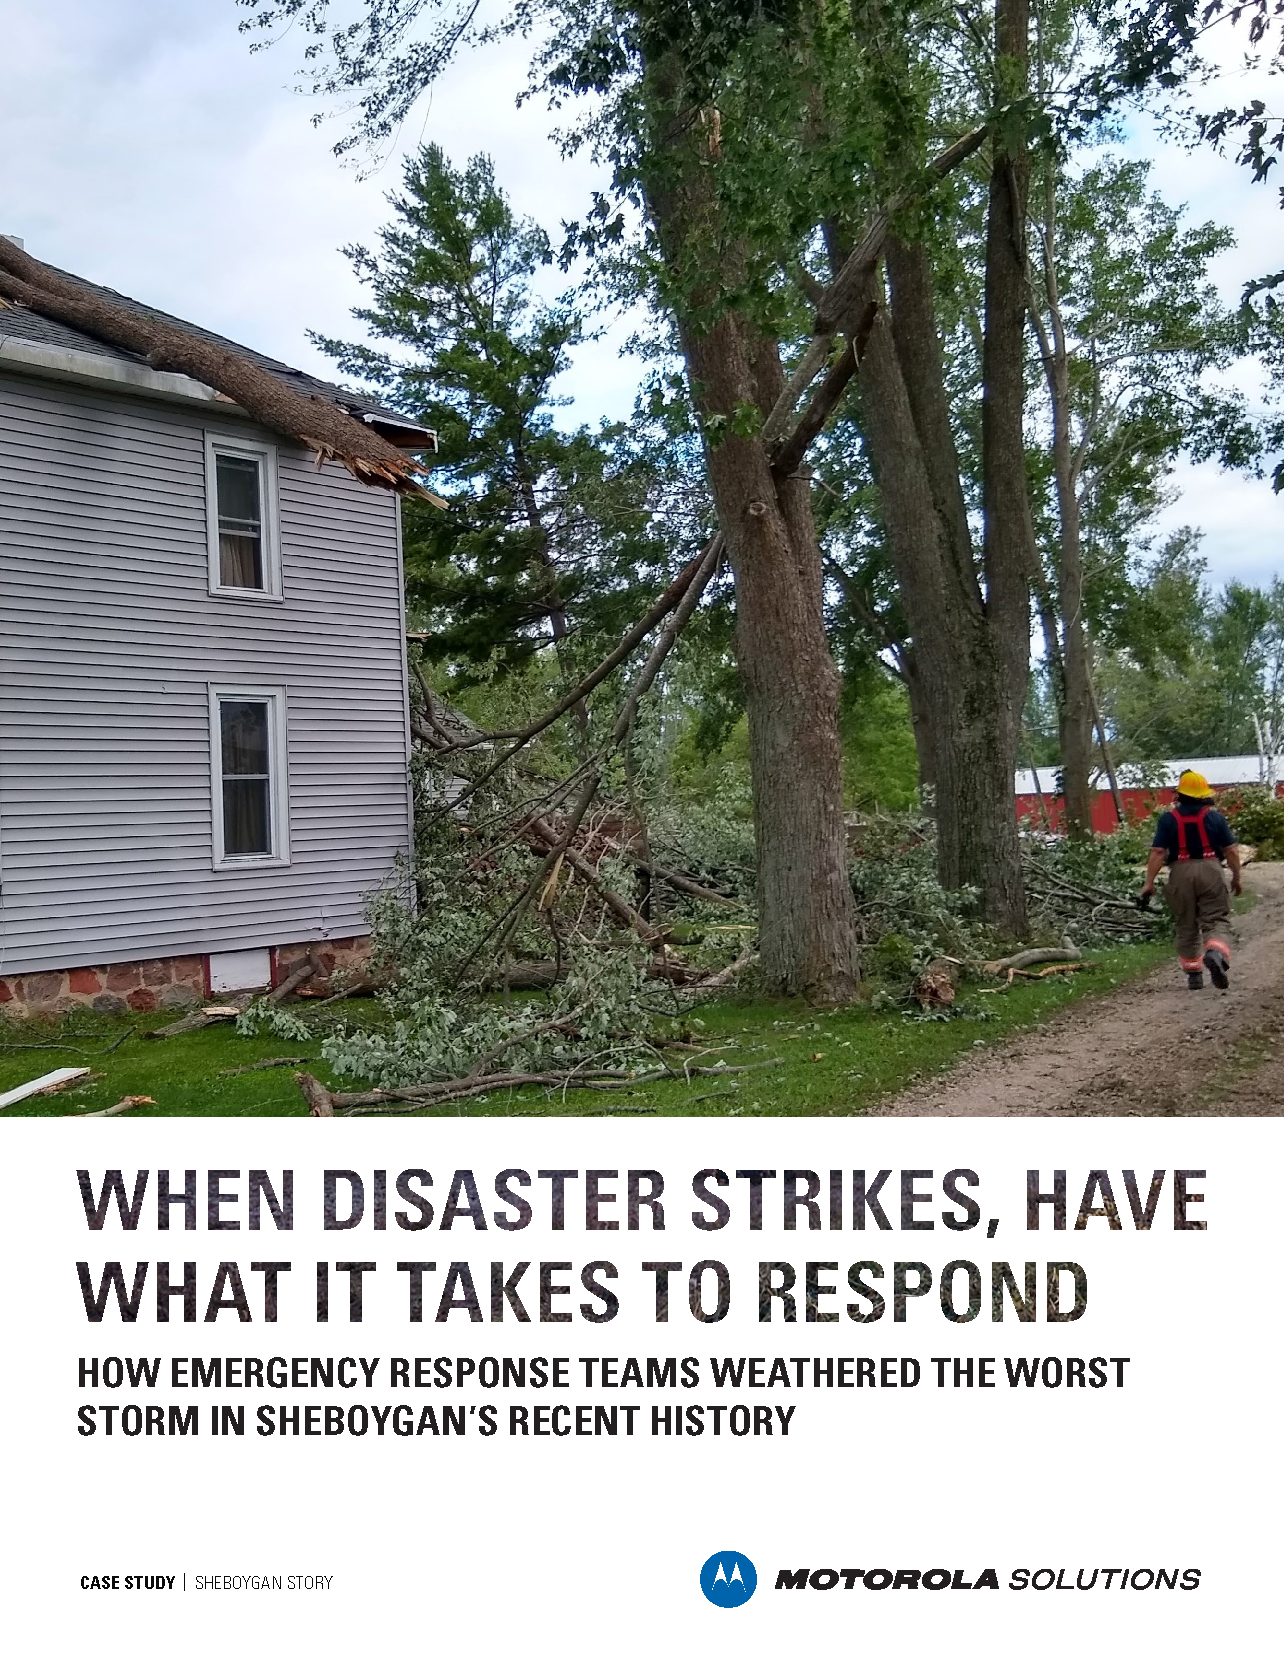 WHEN CATASTROPHIC EVENTS OCCUR, emergency responders are put to the test more than ever.